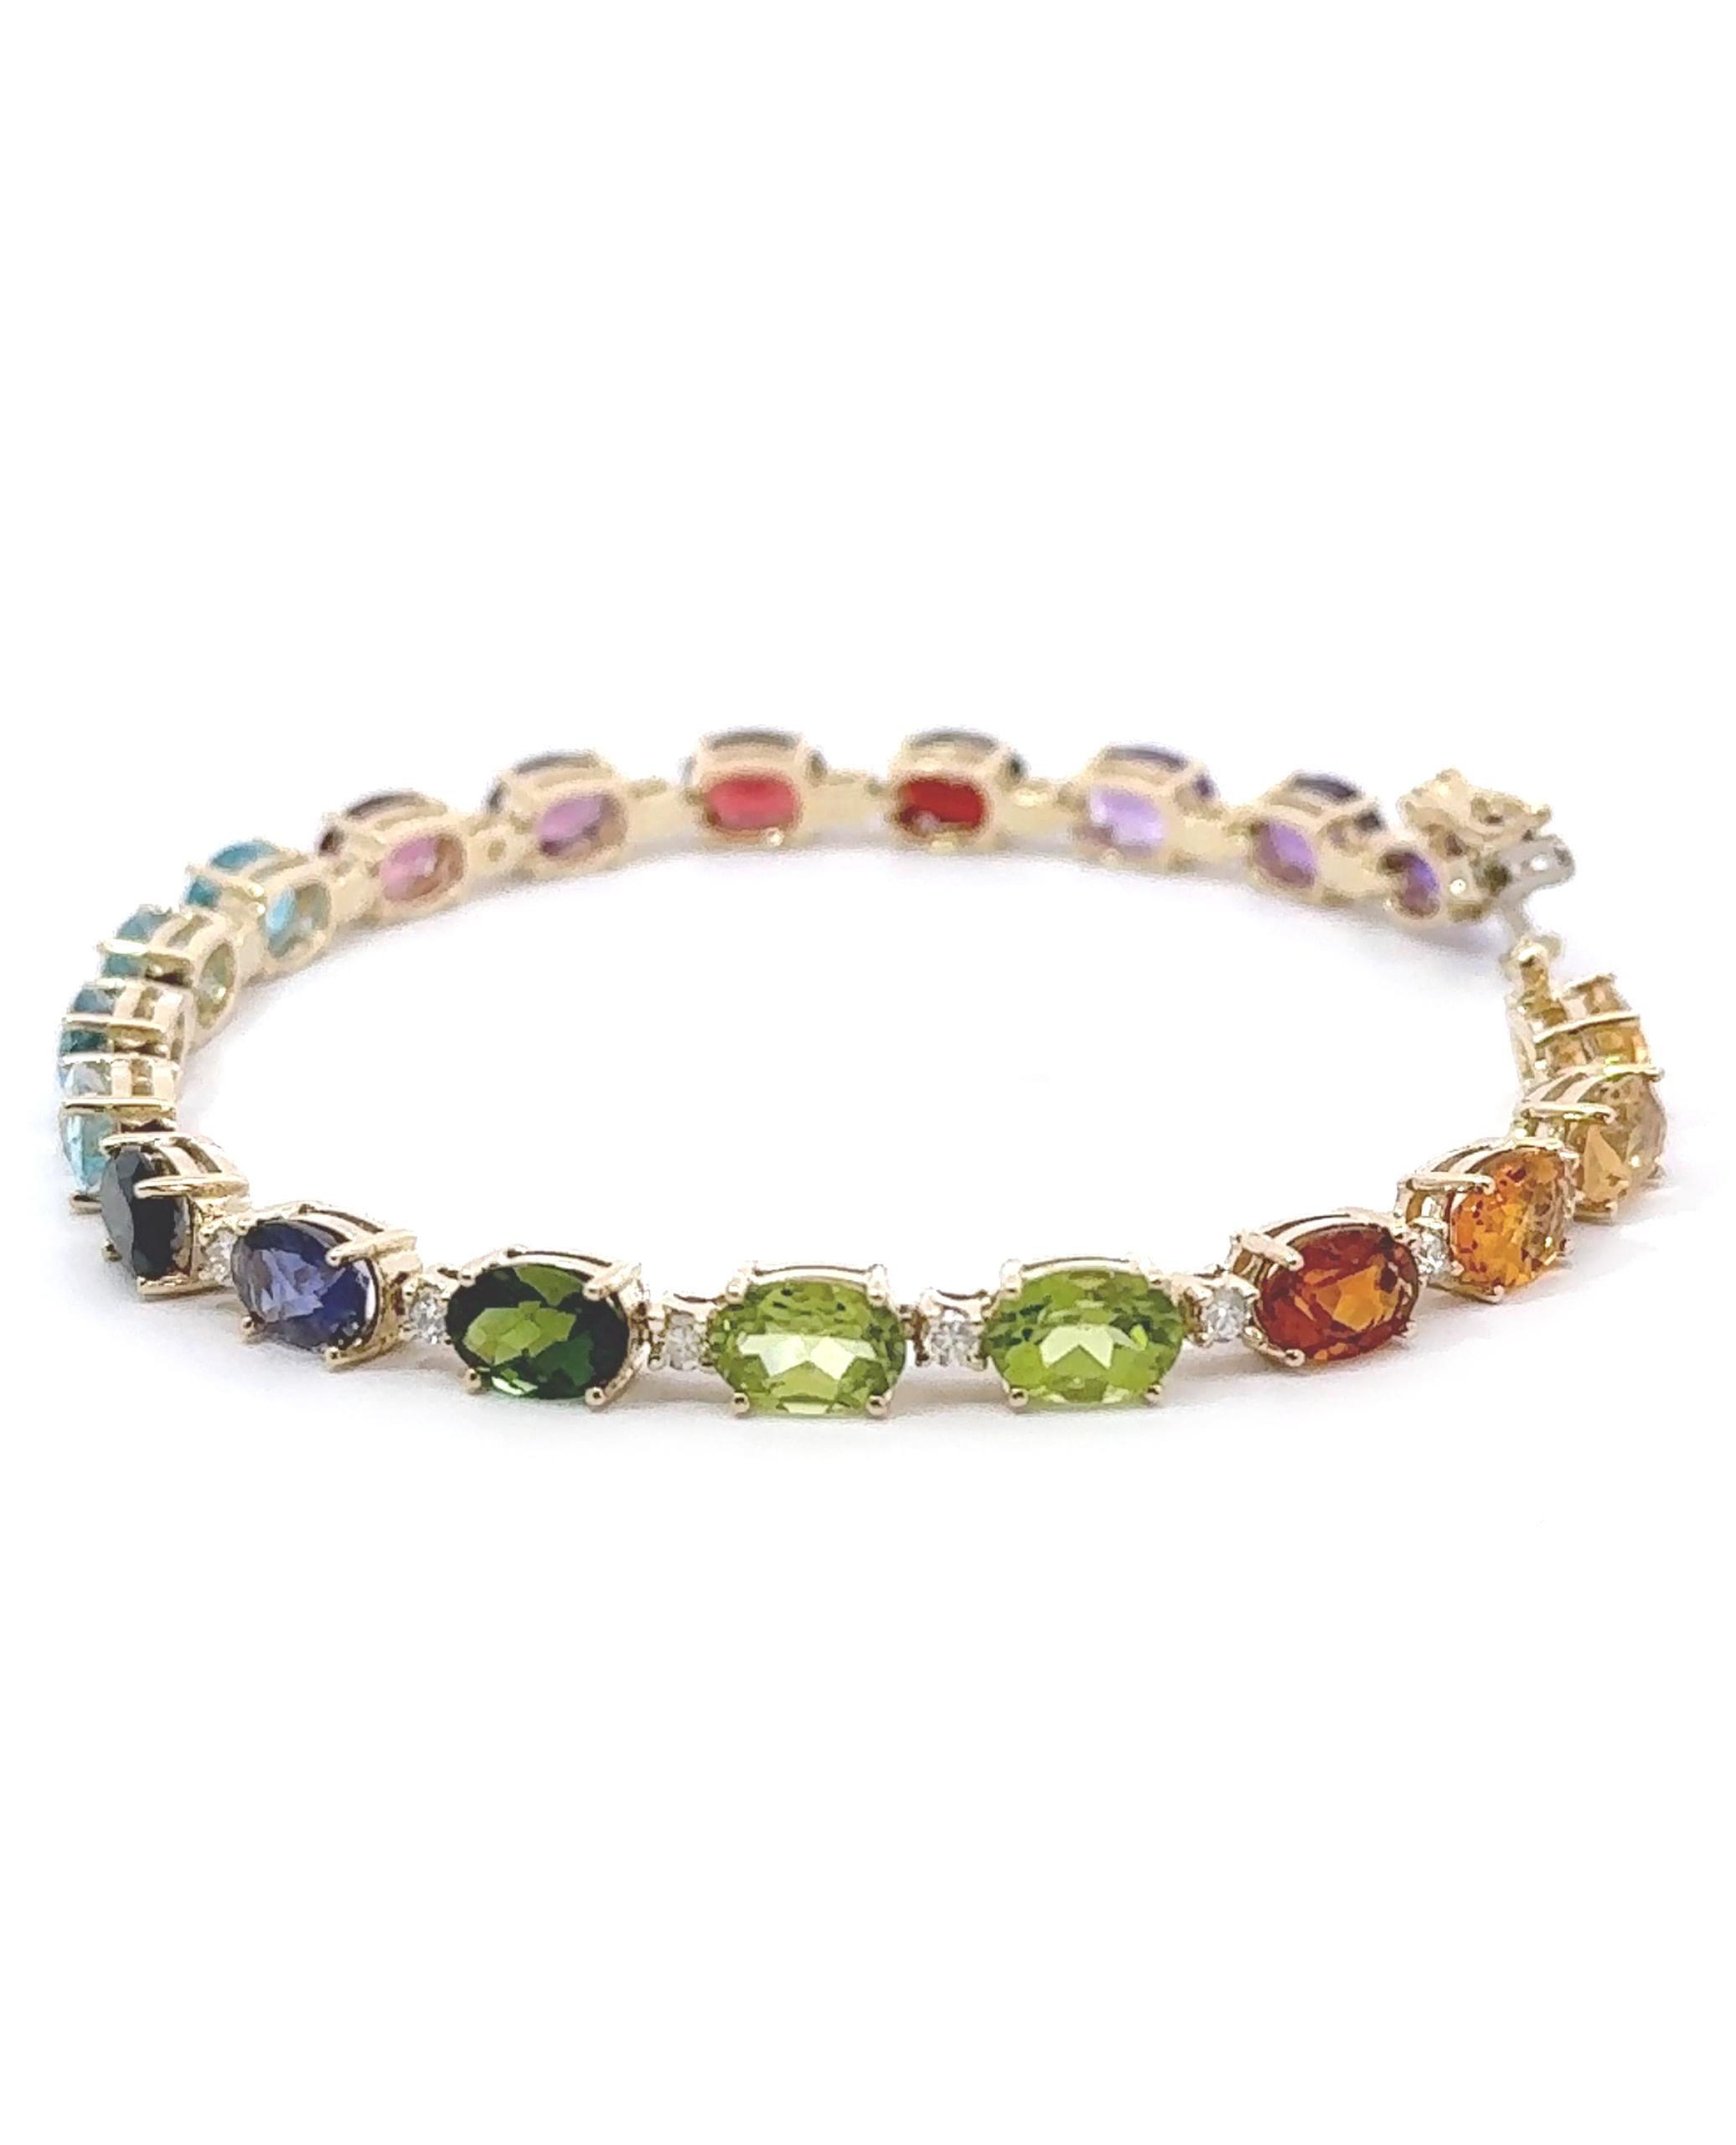 14K yellow gold line bracelet with 20 faceted oval shape semiprecious stones 15.48 carats total. 
The bracelet is also furnished with an additional 20 round brilliant-cut diamonds 0.65 carats total.

* 7 inches long
* Stones include amethyst,